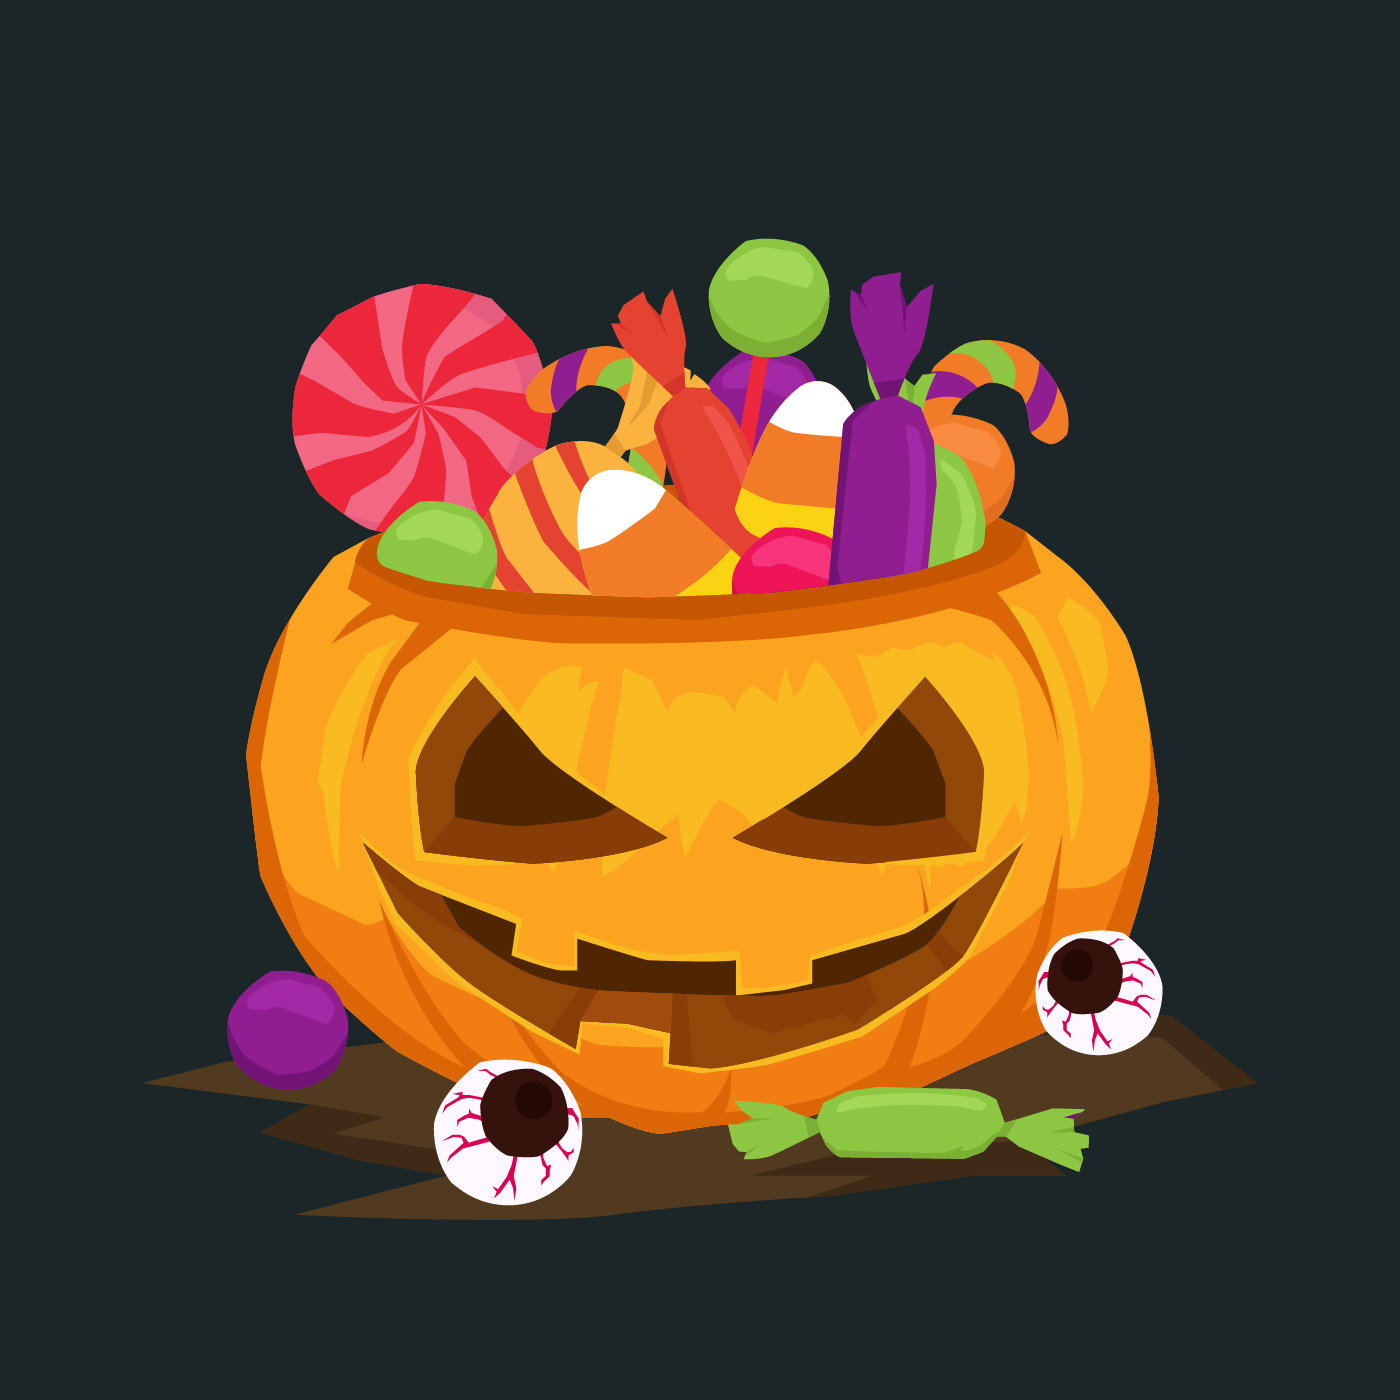 Download Halloween Candy Free Vector Art - (2532 Free Downloads)